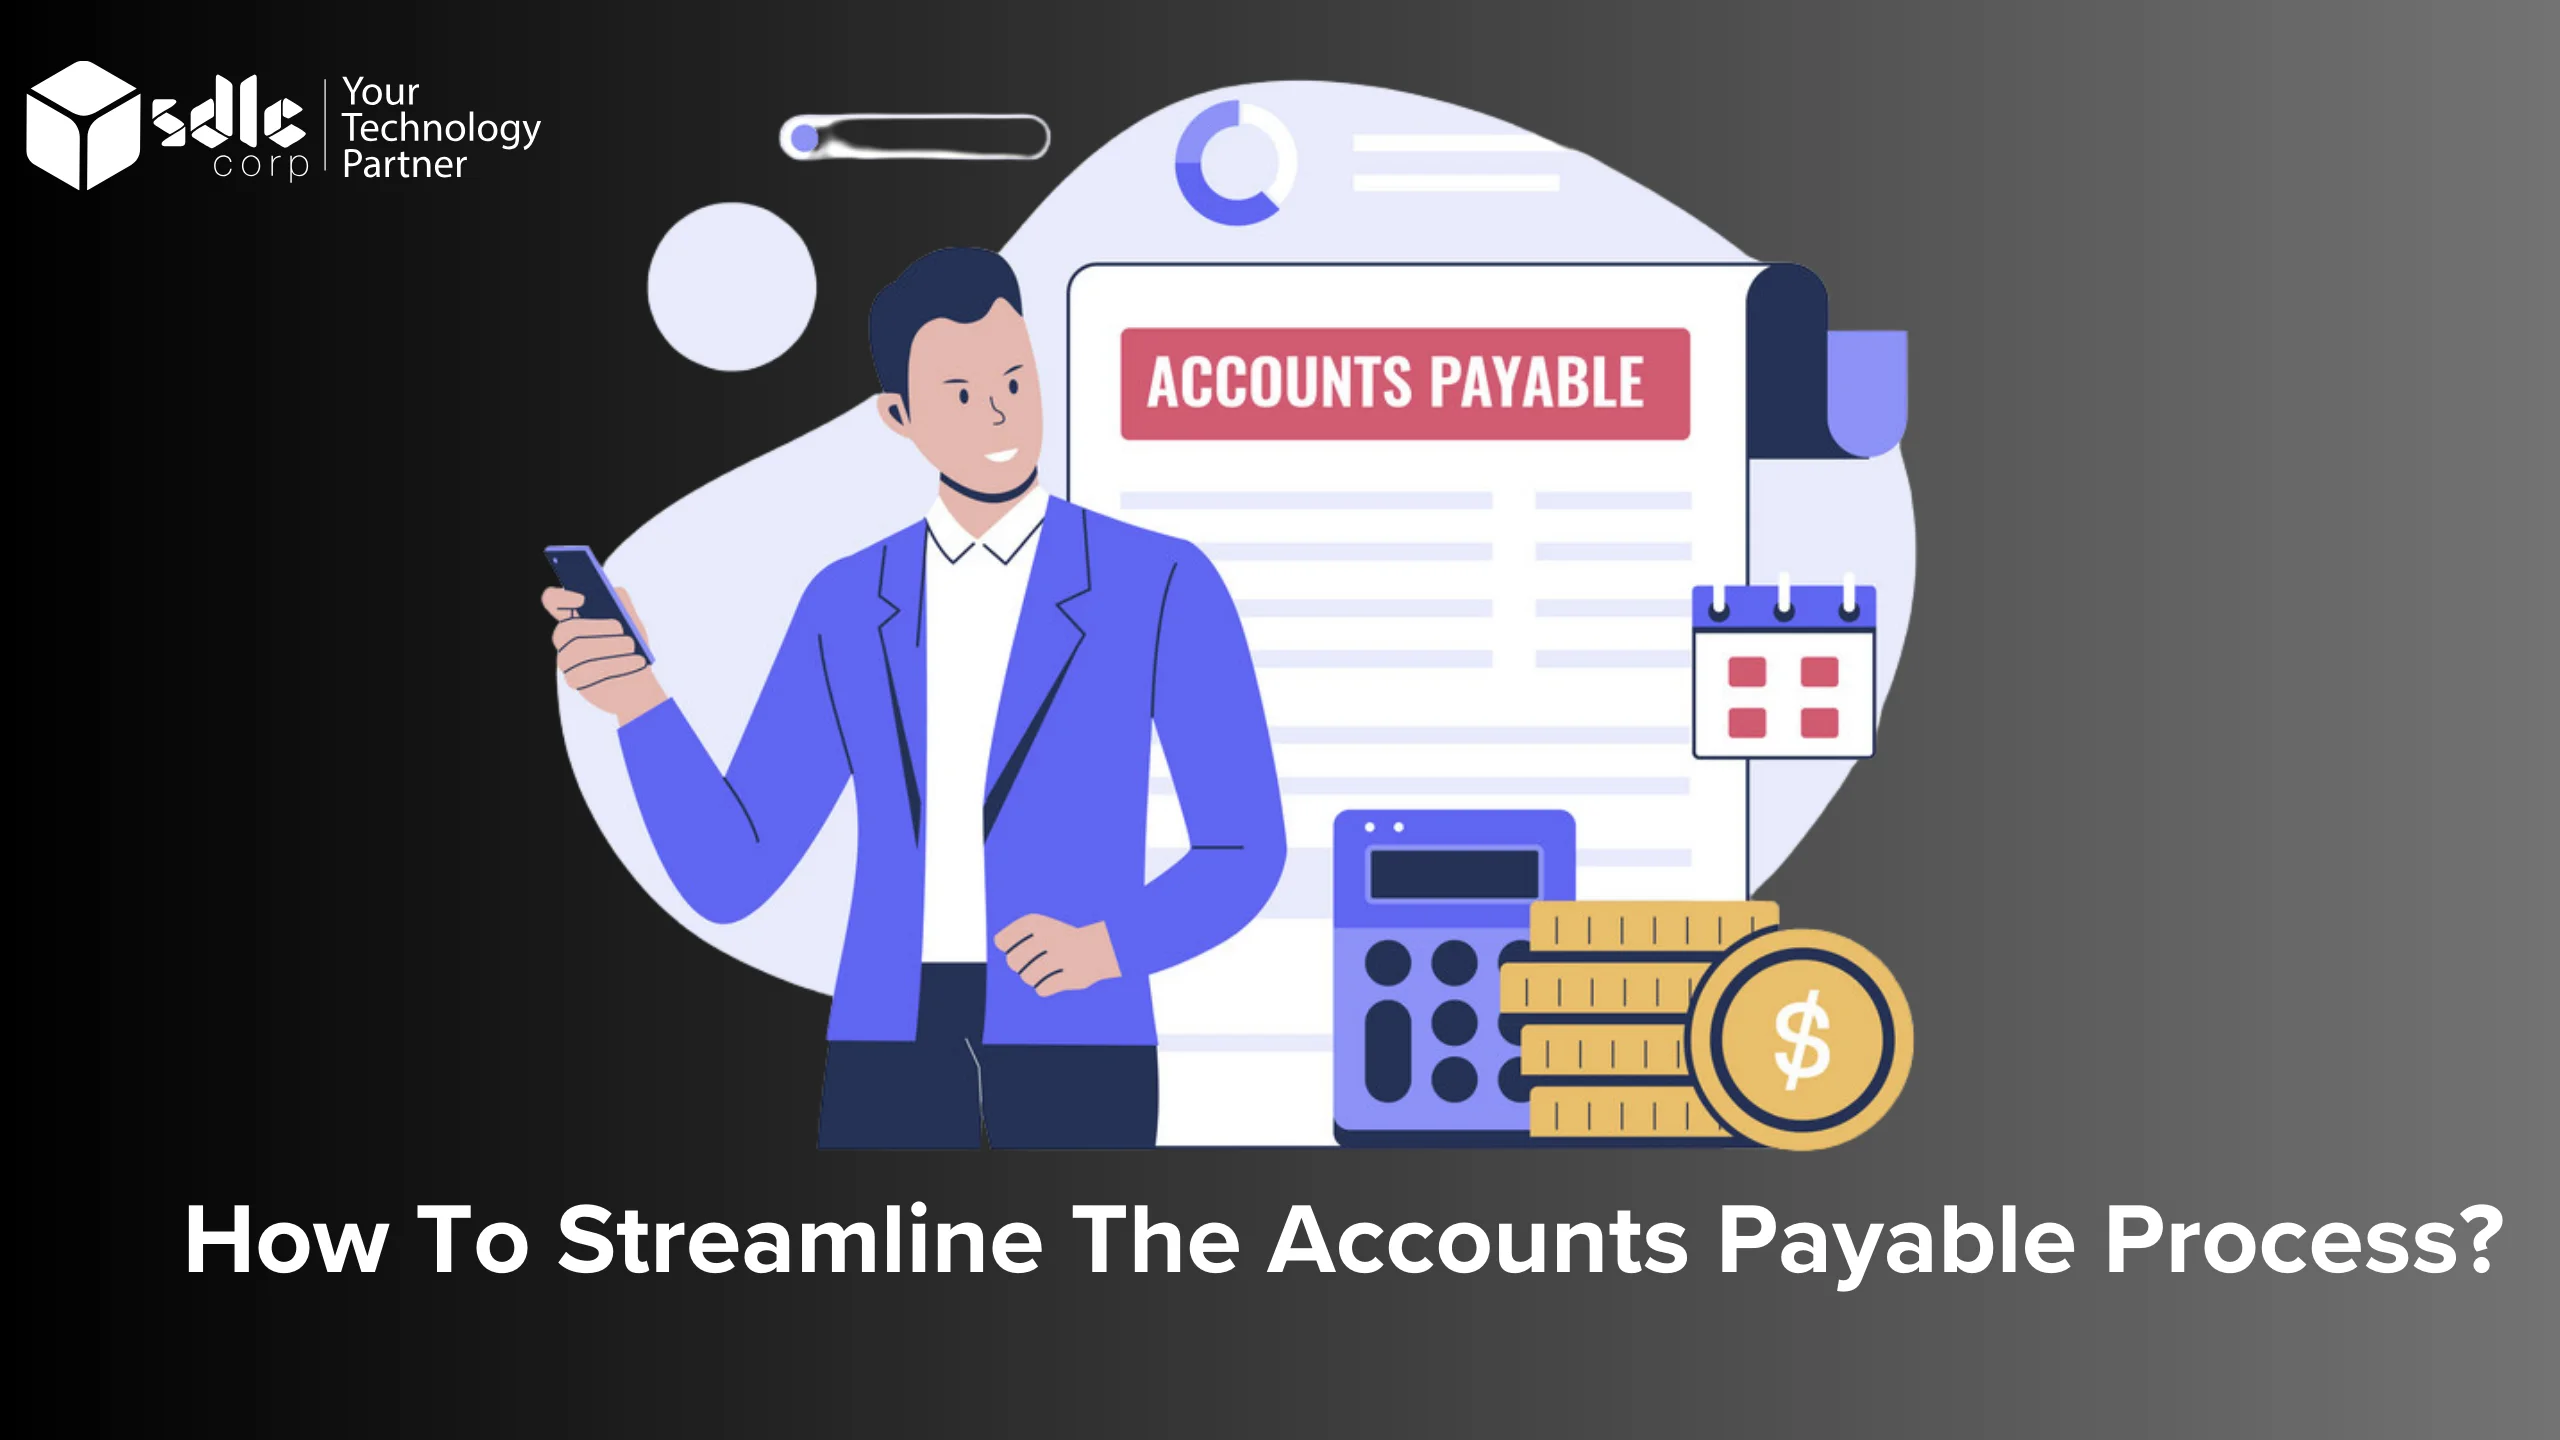 How to Streamline the Accounts Payable Process